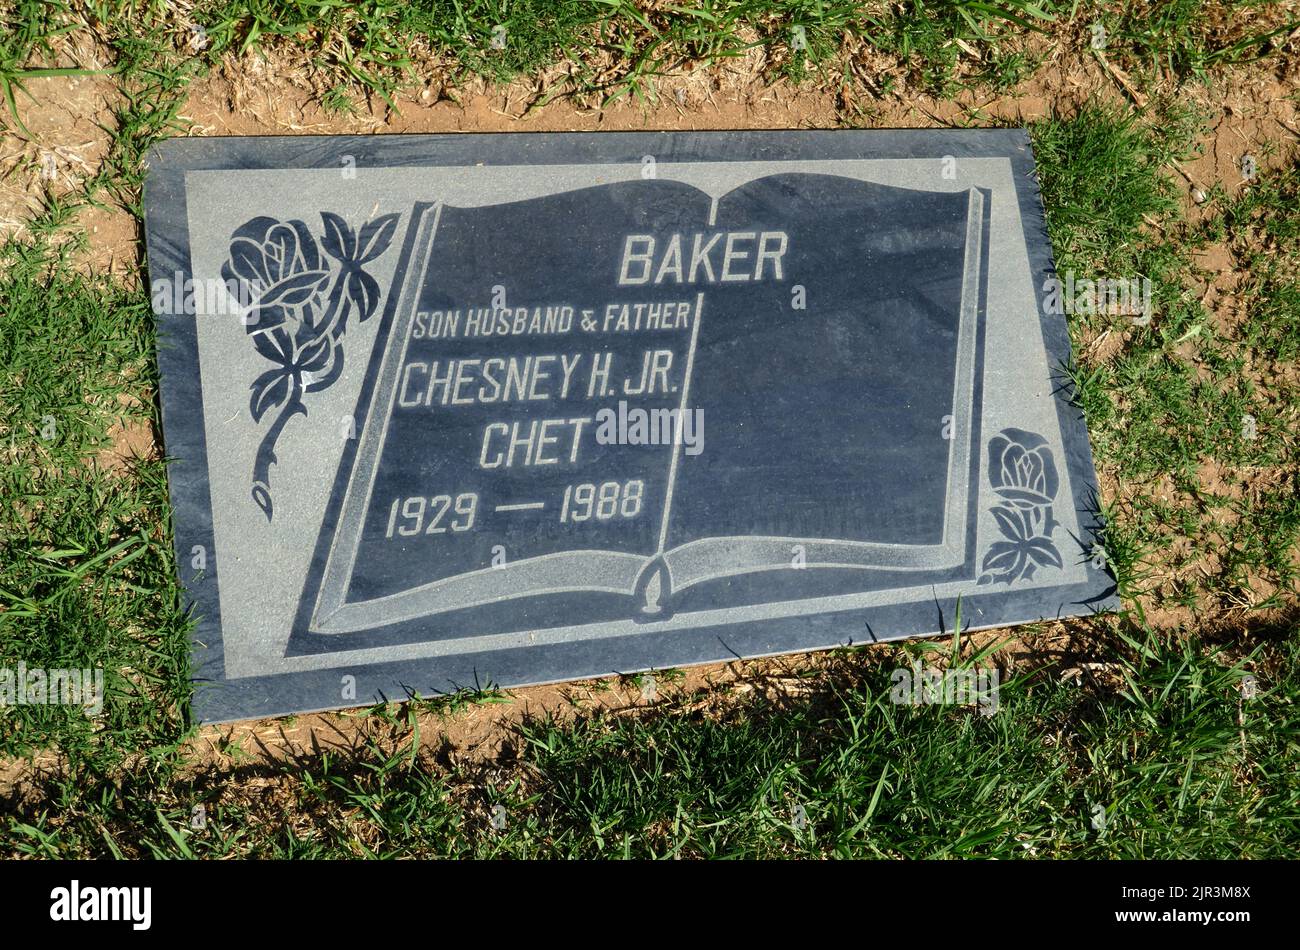 Inglewood, California, USA 19th August 2022 Musician Chet Baker's Grave in Elm Section at Inglewood Park Cemetery on August 19, 2022 in Inglewood, Los Angeles, California, USA. Photo by Barry King/Alamy Stock Photo Stock Photo